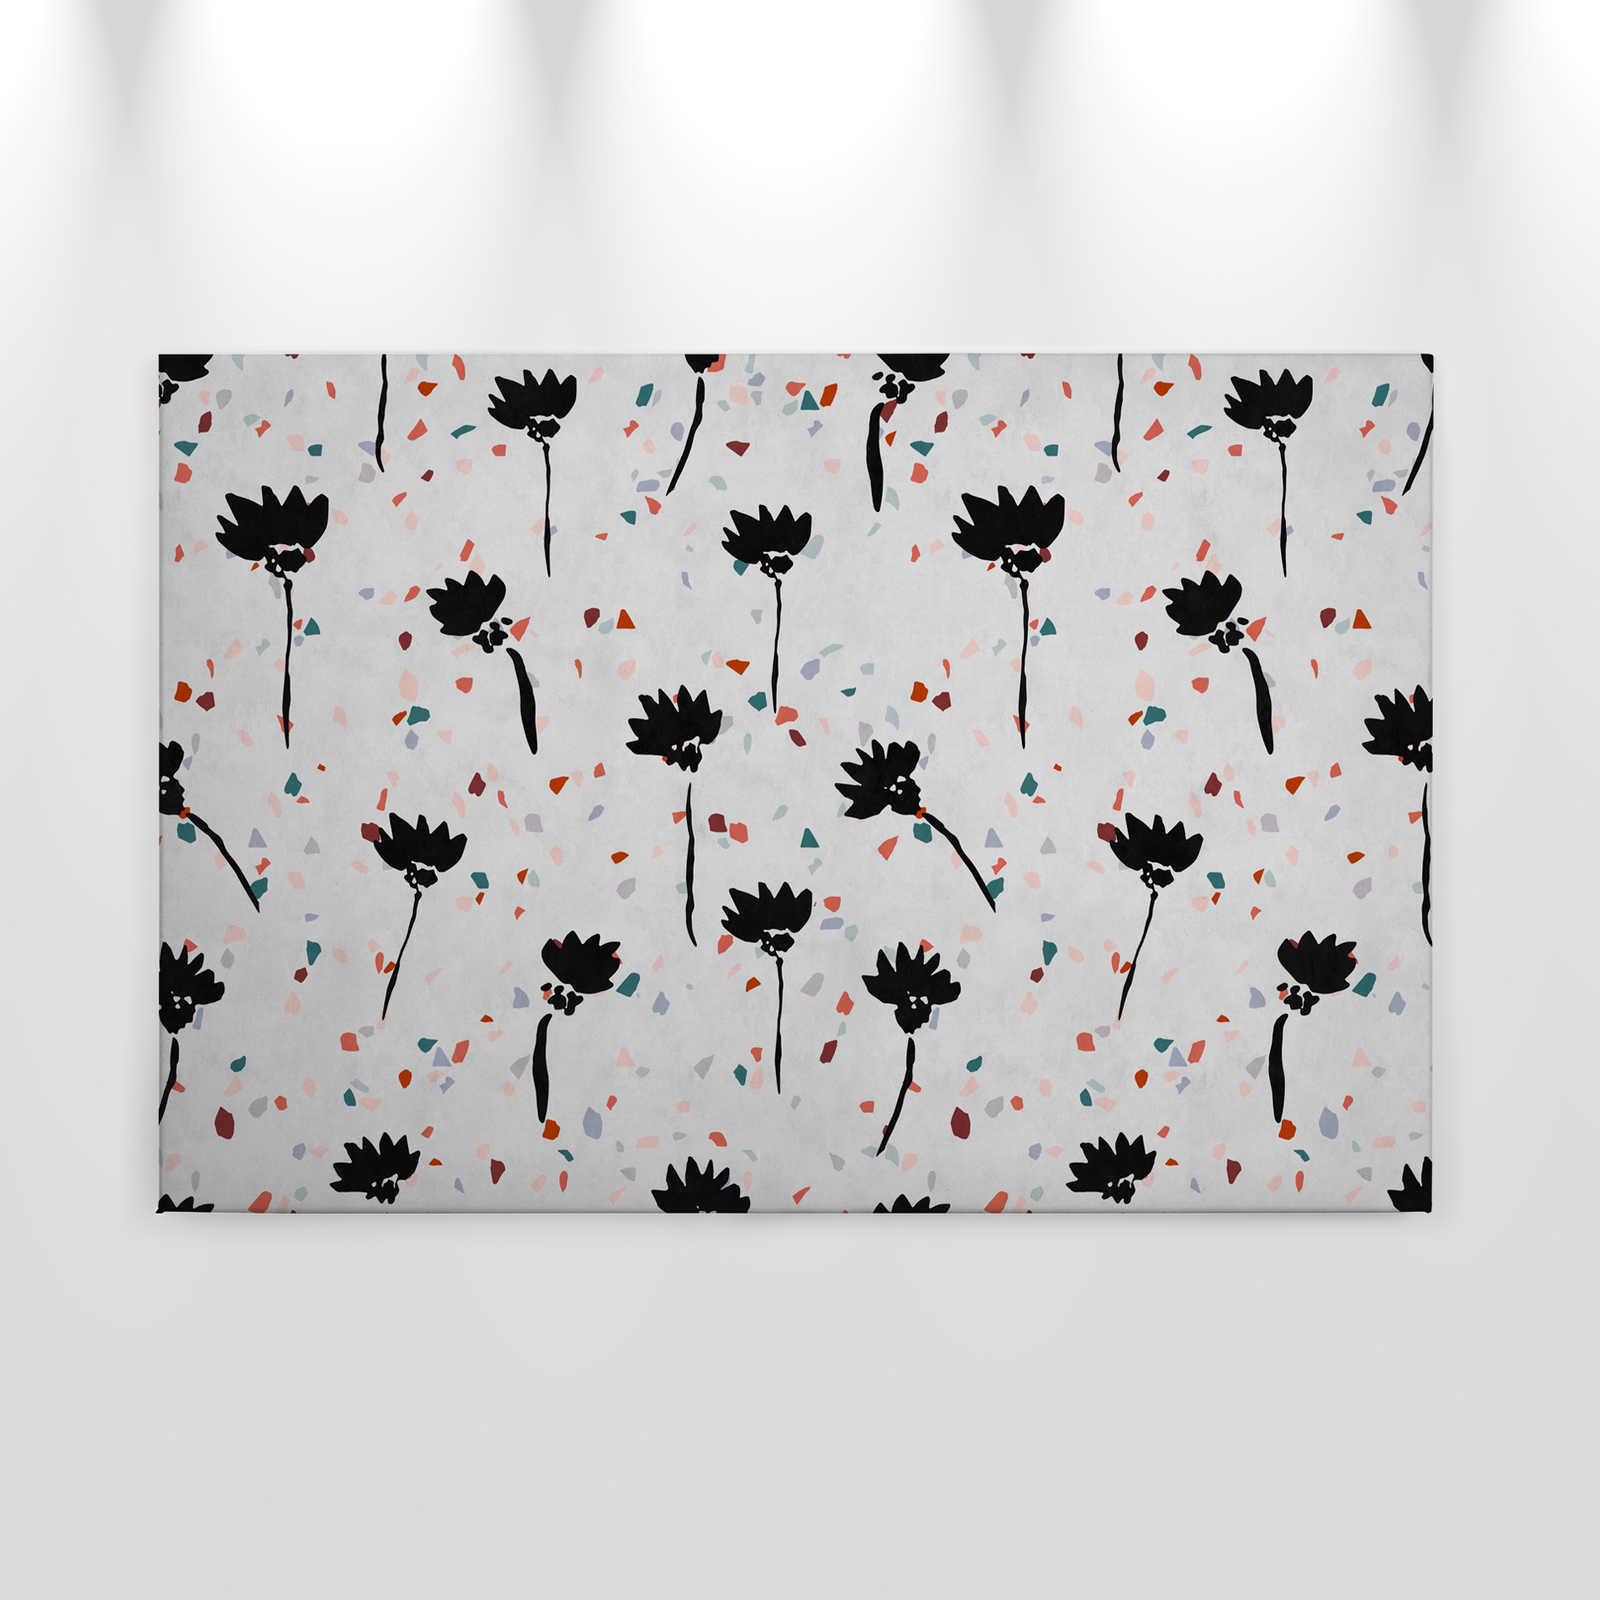             Terrazzo 2 - Canvas painting in blotting paper structure terrazzo patterned, stone look - 0.90 m x 0.60 m
        